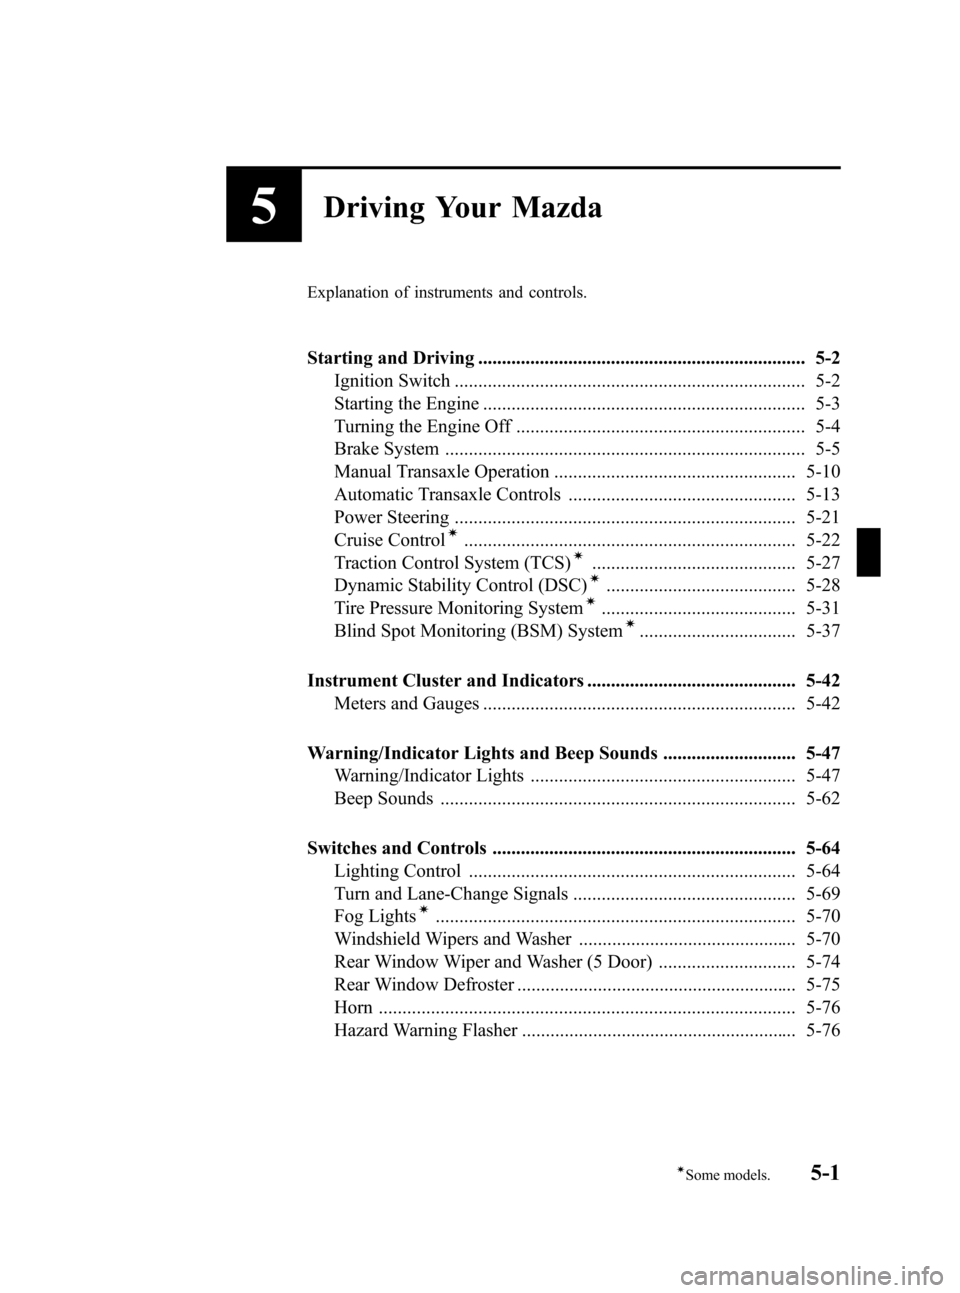 MAZDA MODEL 3 HATCHBACK 2012  Owners Manual (in English) Black plate (163,1)
5Driving Your Mazda
Explanation of instruments and controls.
Starting and Driving ..................................................................... 5-2Ignition Switch .........